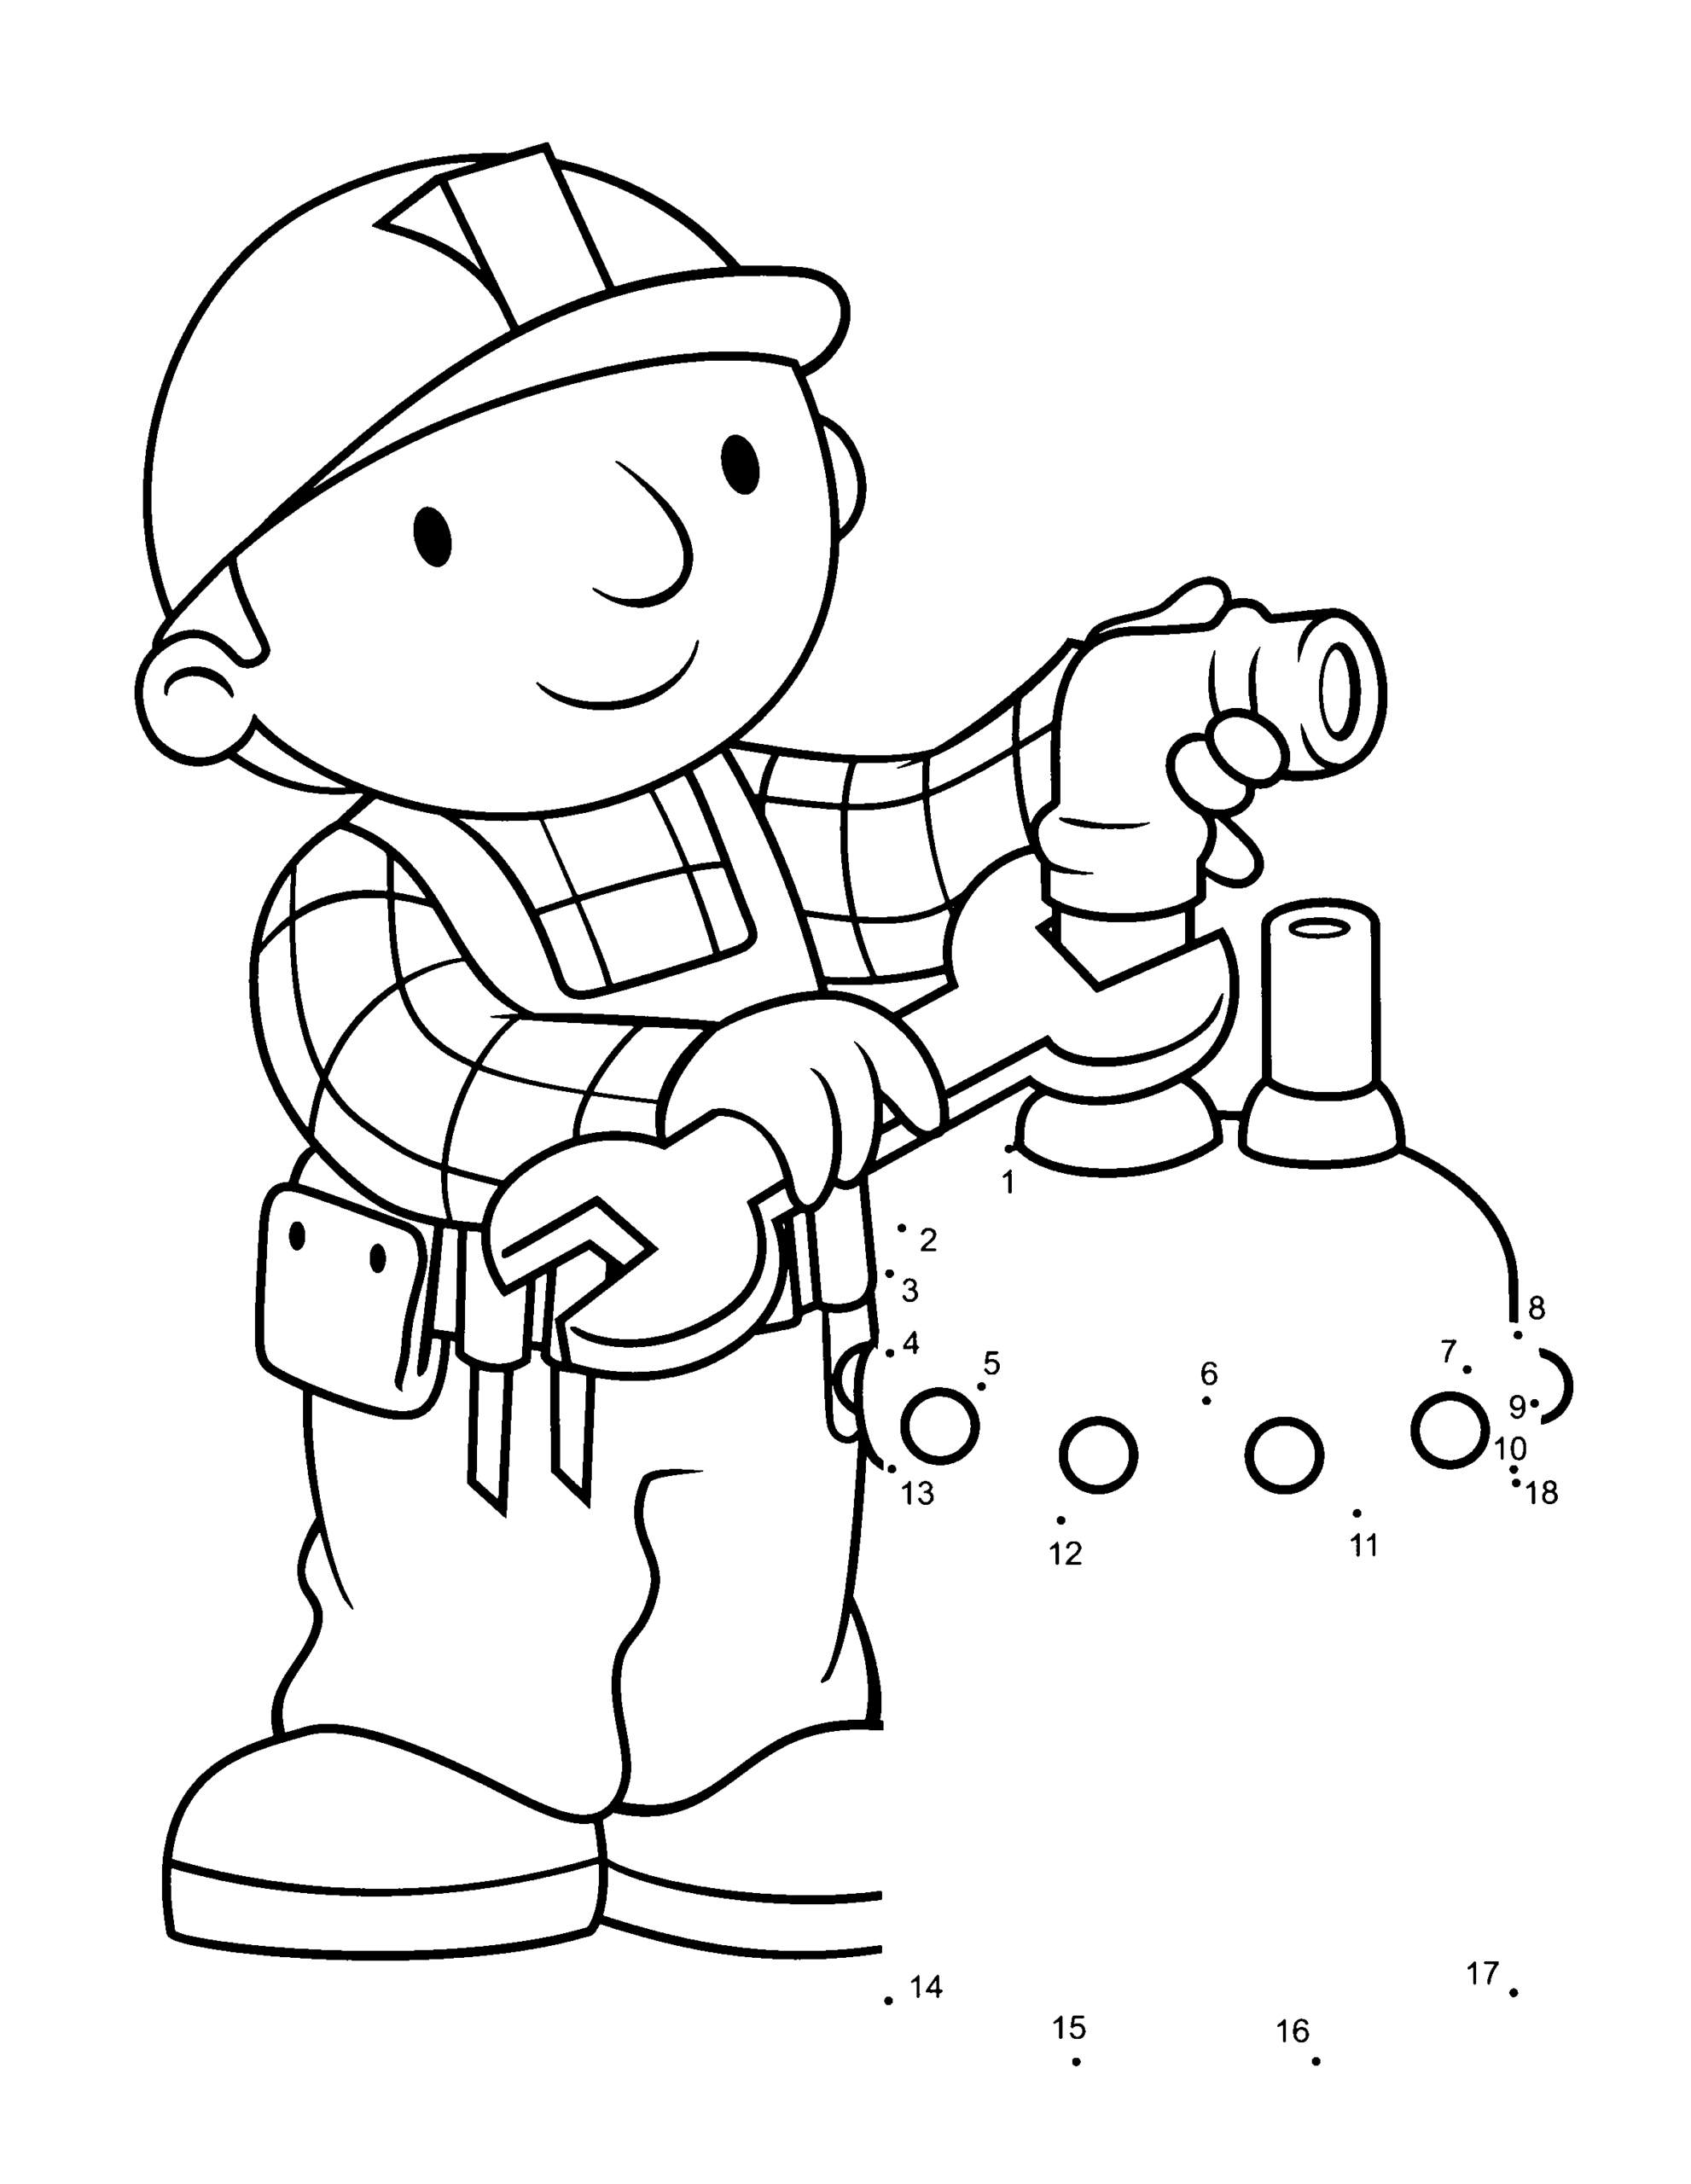 Bob the Builder Coloring Pages TV Film bob the builder 96 Printable 2020 01108 Coloring4free